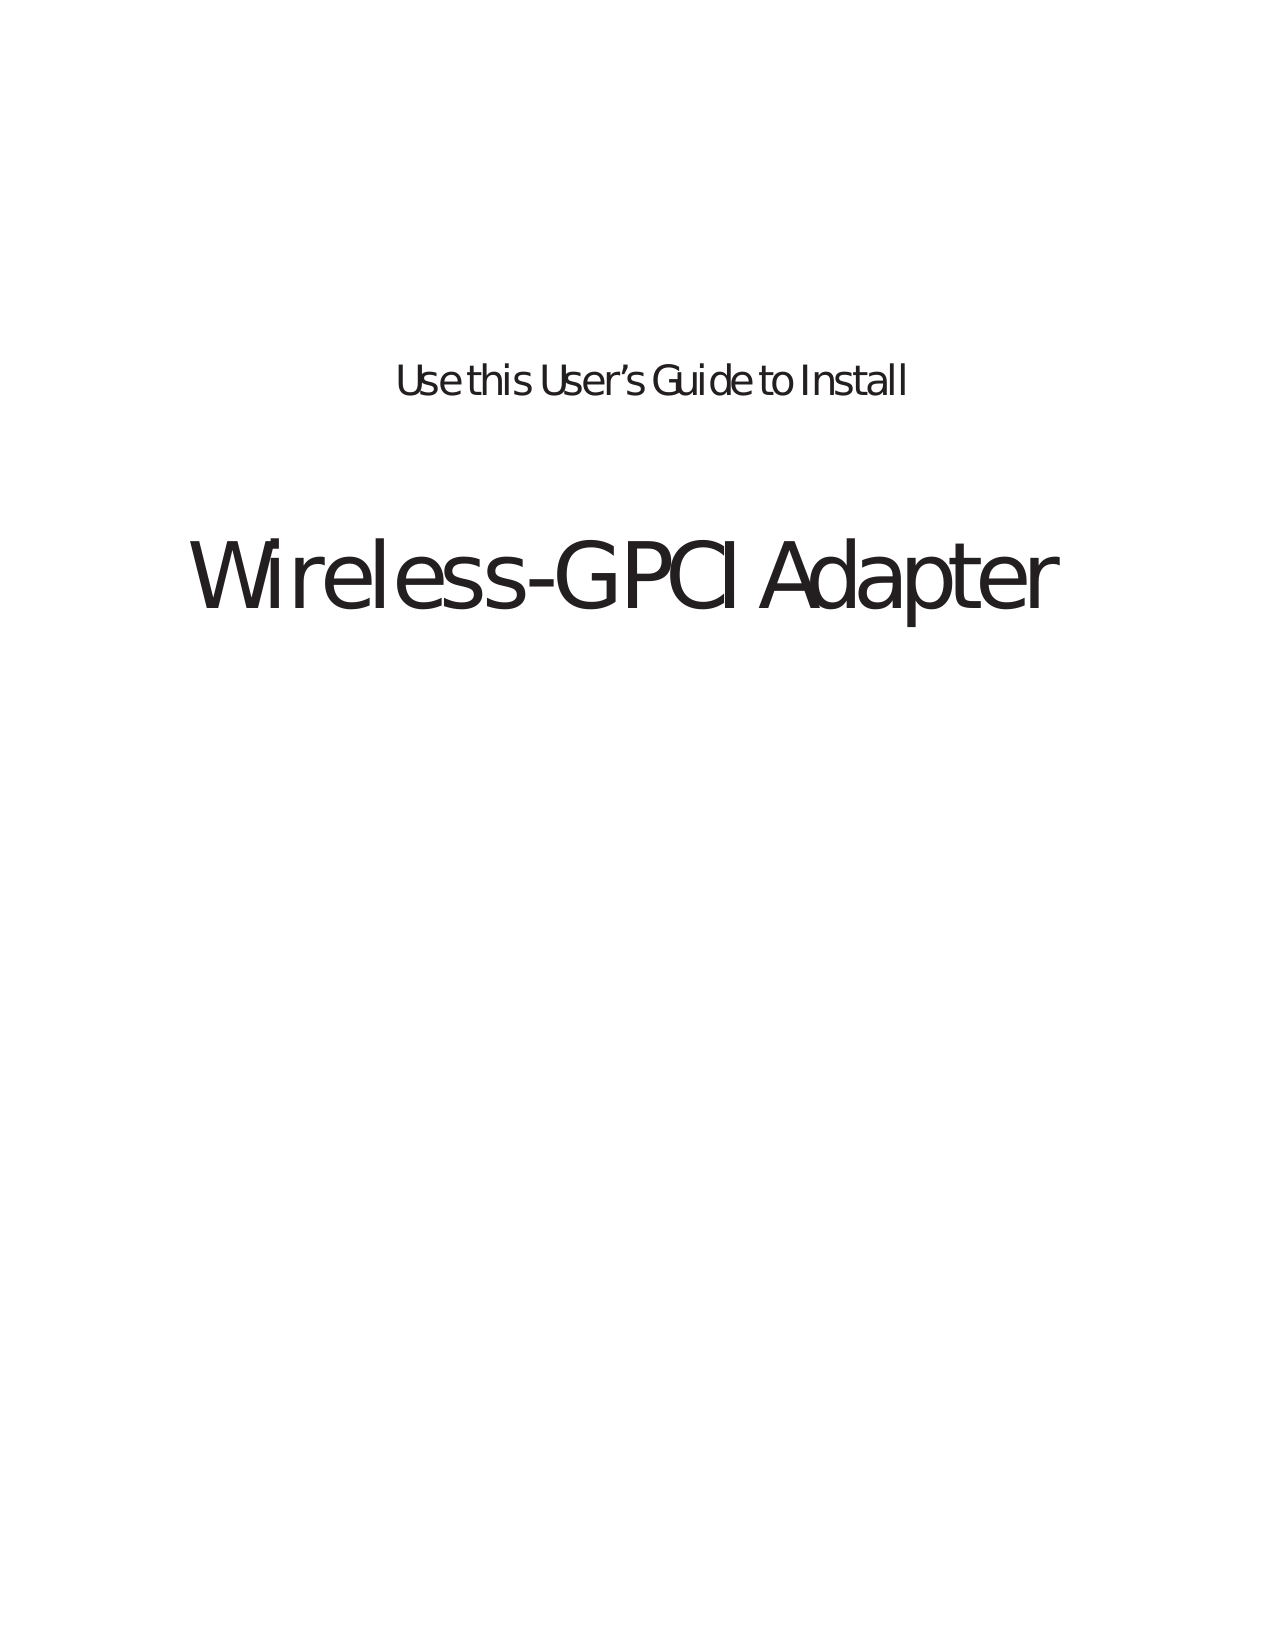     Use this User’s Guide to Install  Wireless-G PCI Adapter           